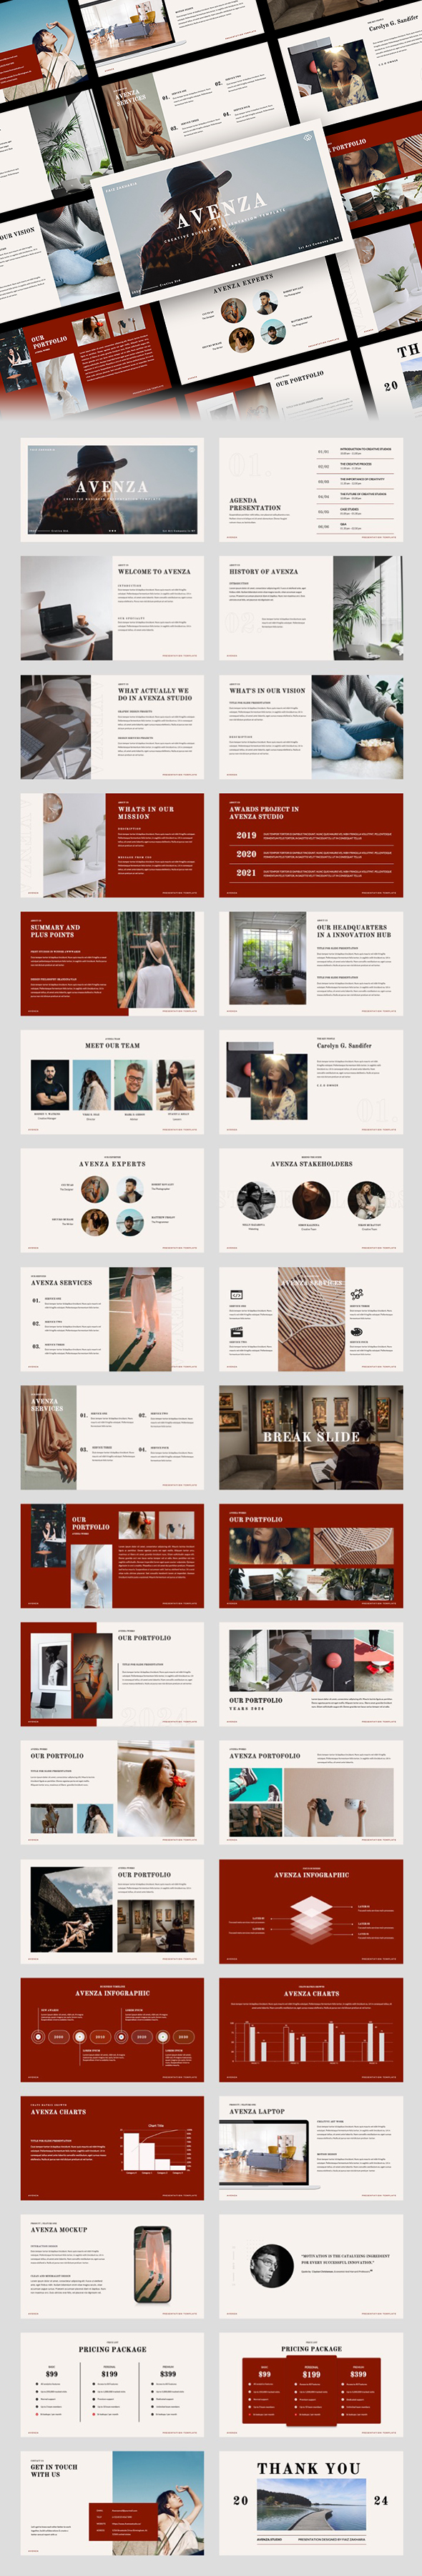 [DOWNLOAD]Avenza – Creative Business Keynote Template